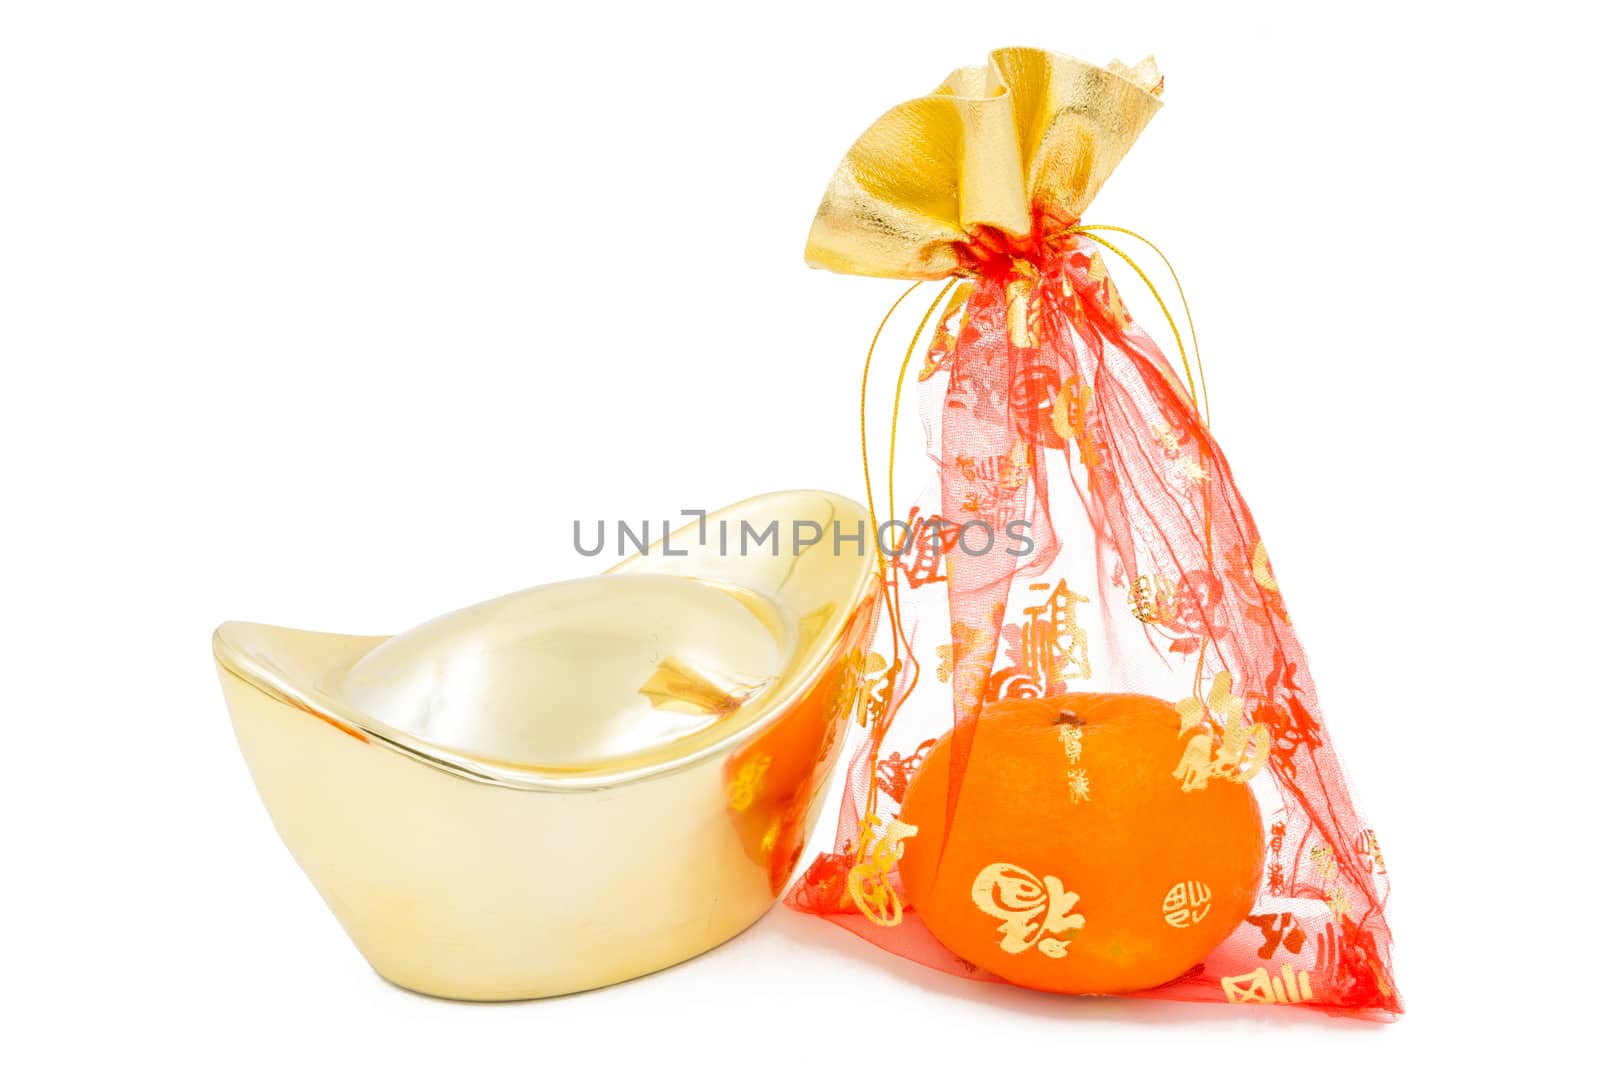 concept image of the chinese new year - Gold Ingot and mandarin orange in the red auspicious bag